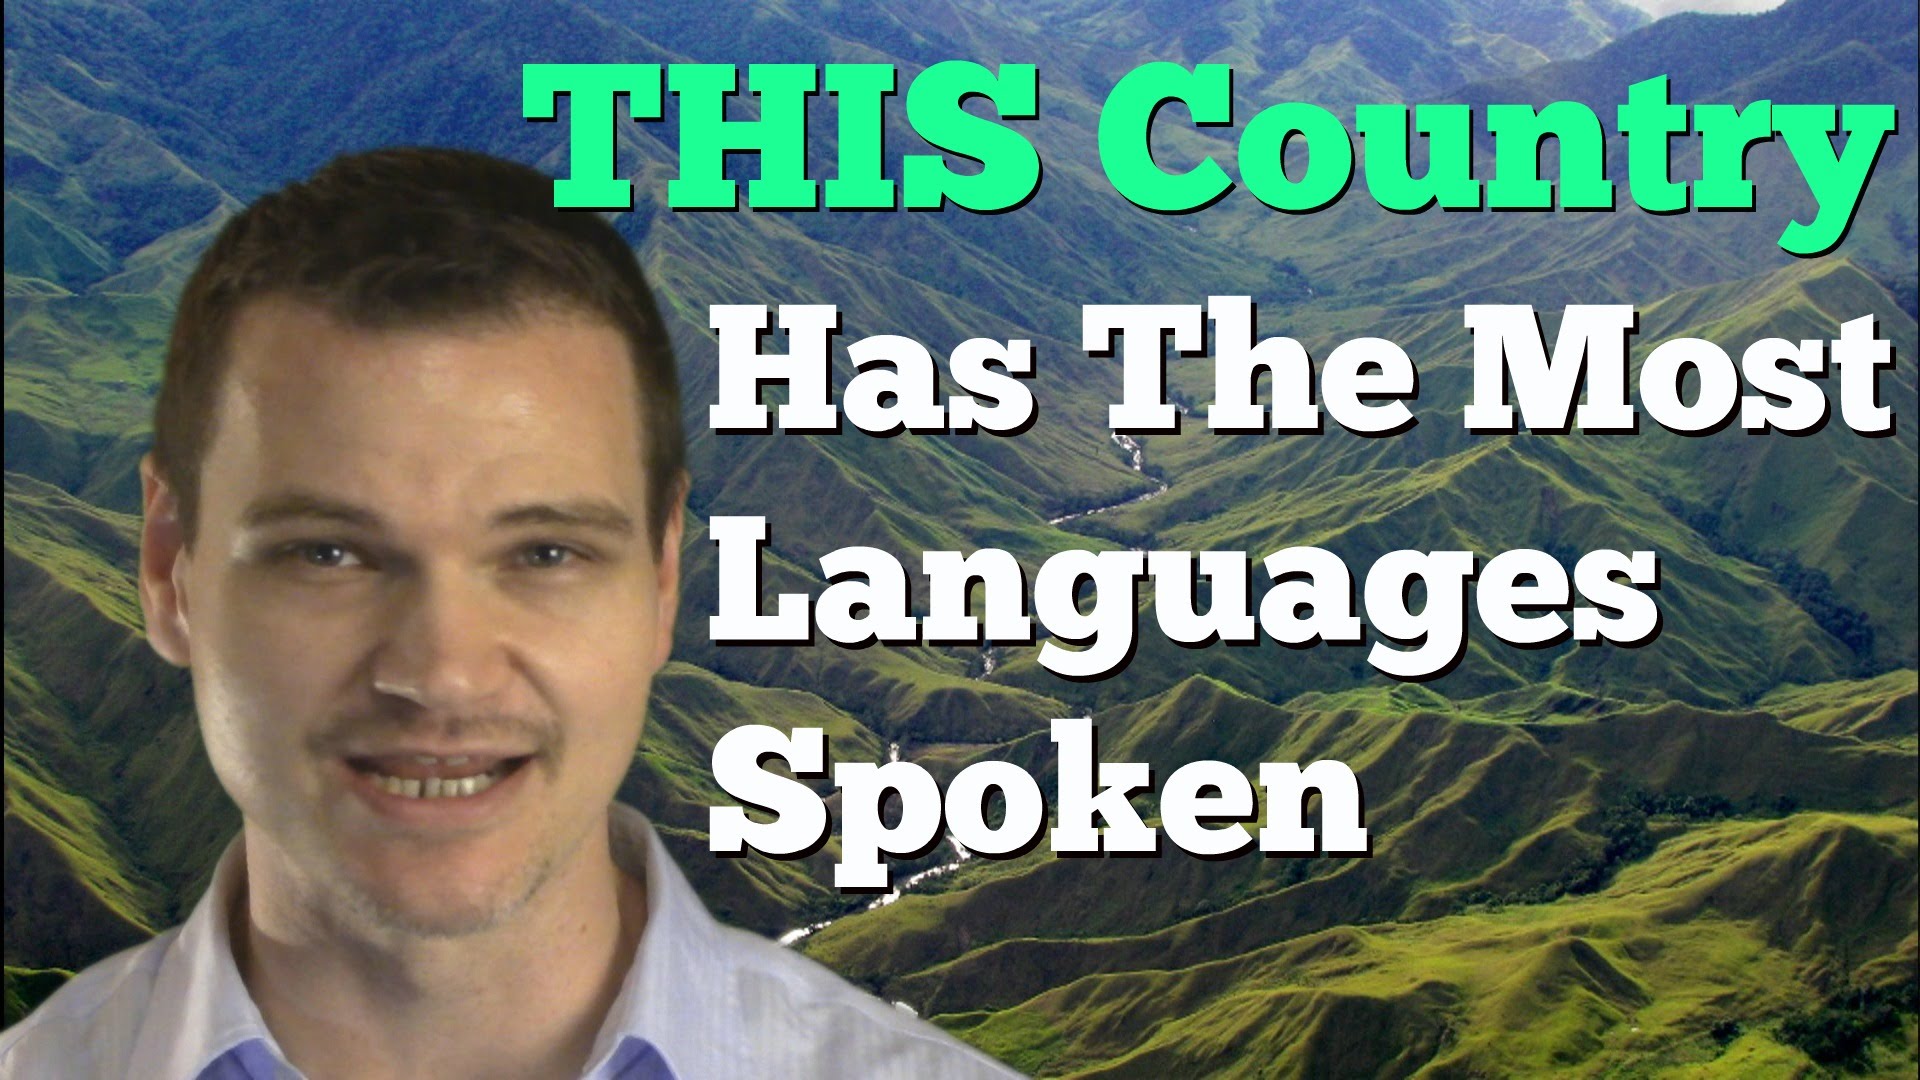 What Country Has the Most Languages Spoken?